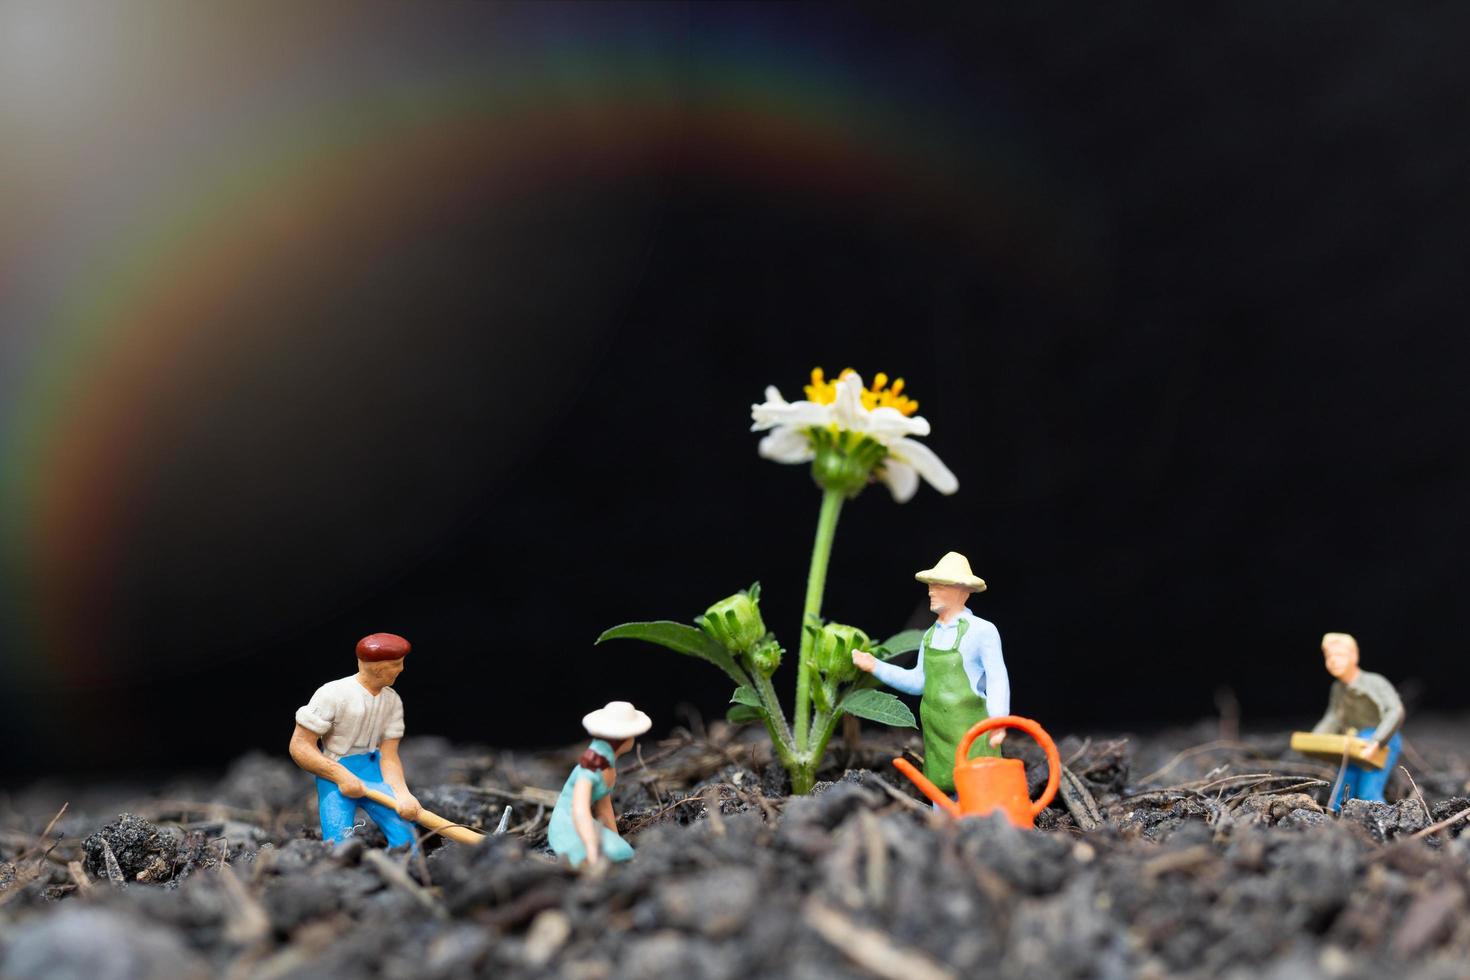 Miniature gardeners taking care of growing plants in the field, environment concept photo